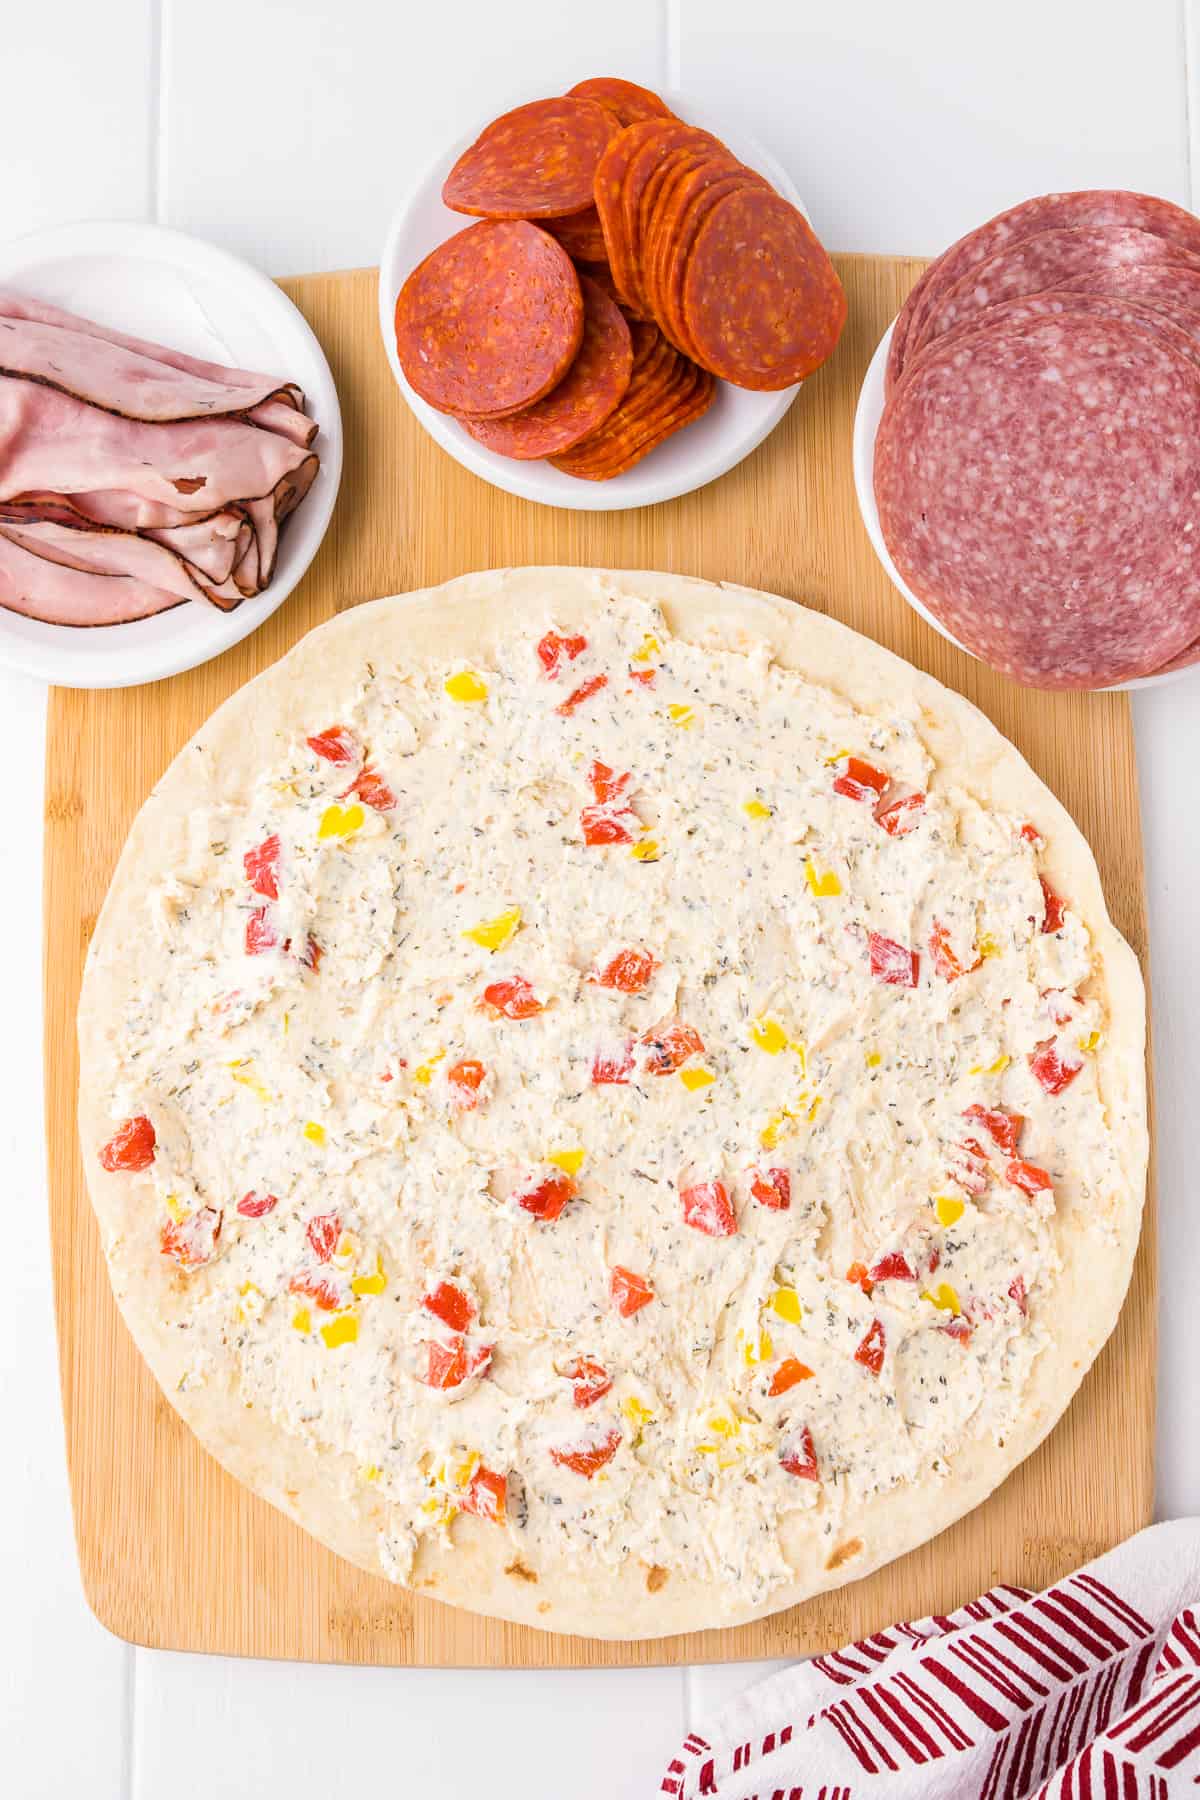 Spreading the cream cheese mixture full of diced peppers on a tortilla from overhead on a cutting board with ham, pepperoni and salami on small plates nearby.